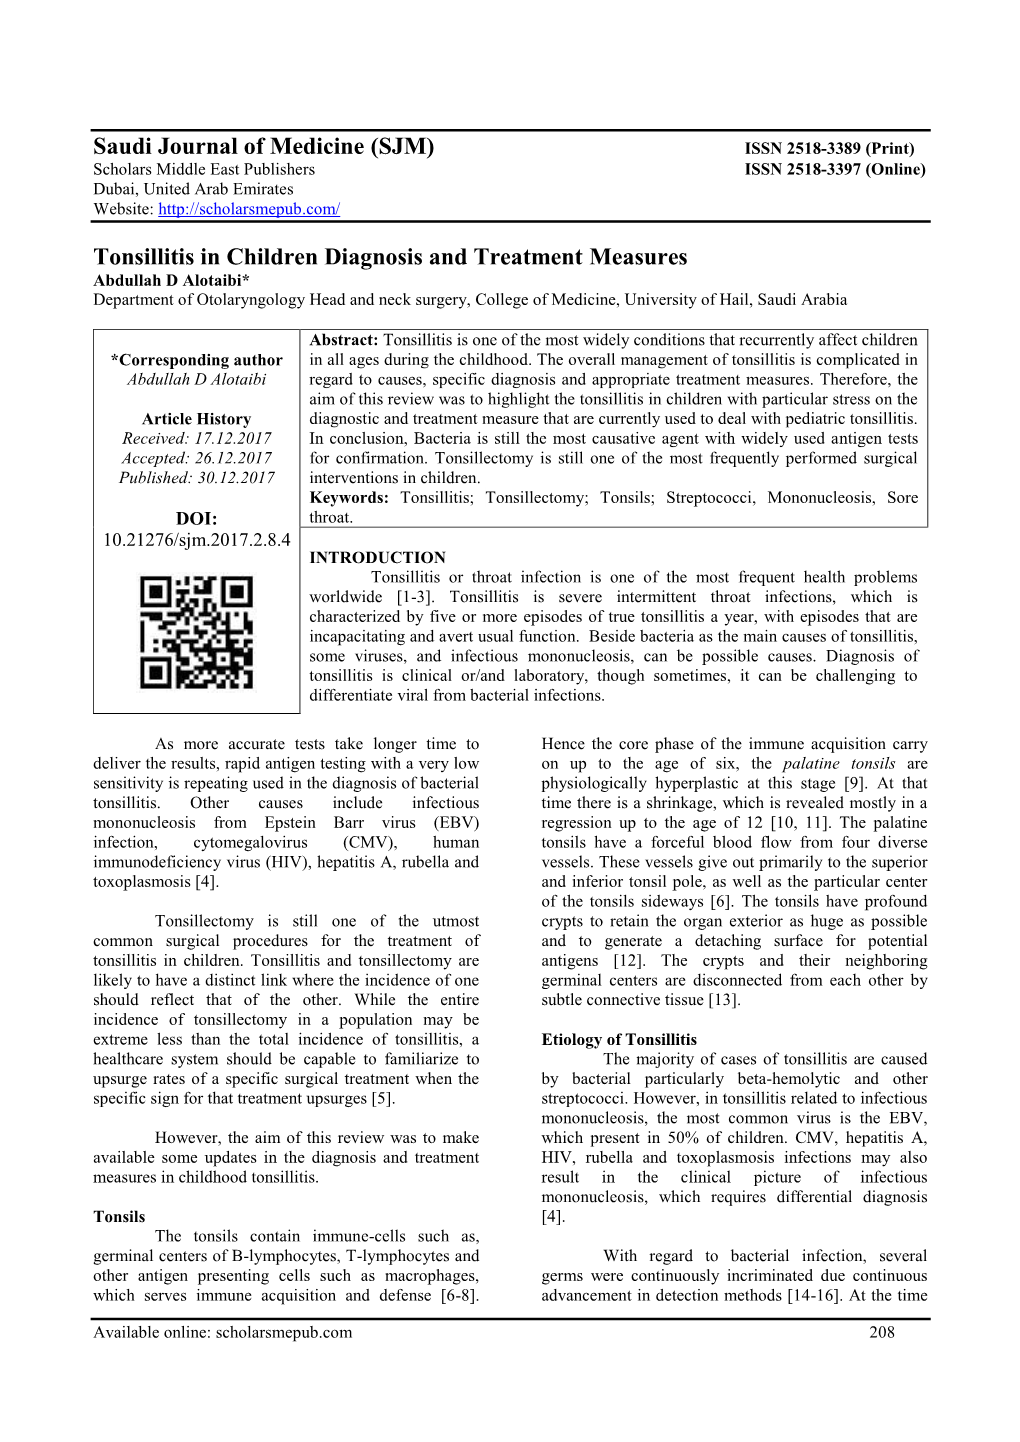 (SJM) Tonsillitis in Children Diagnosis and Treatment Measures